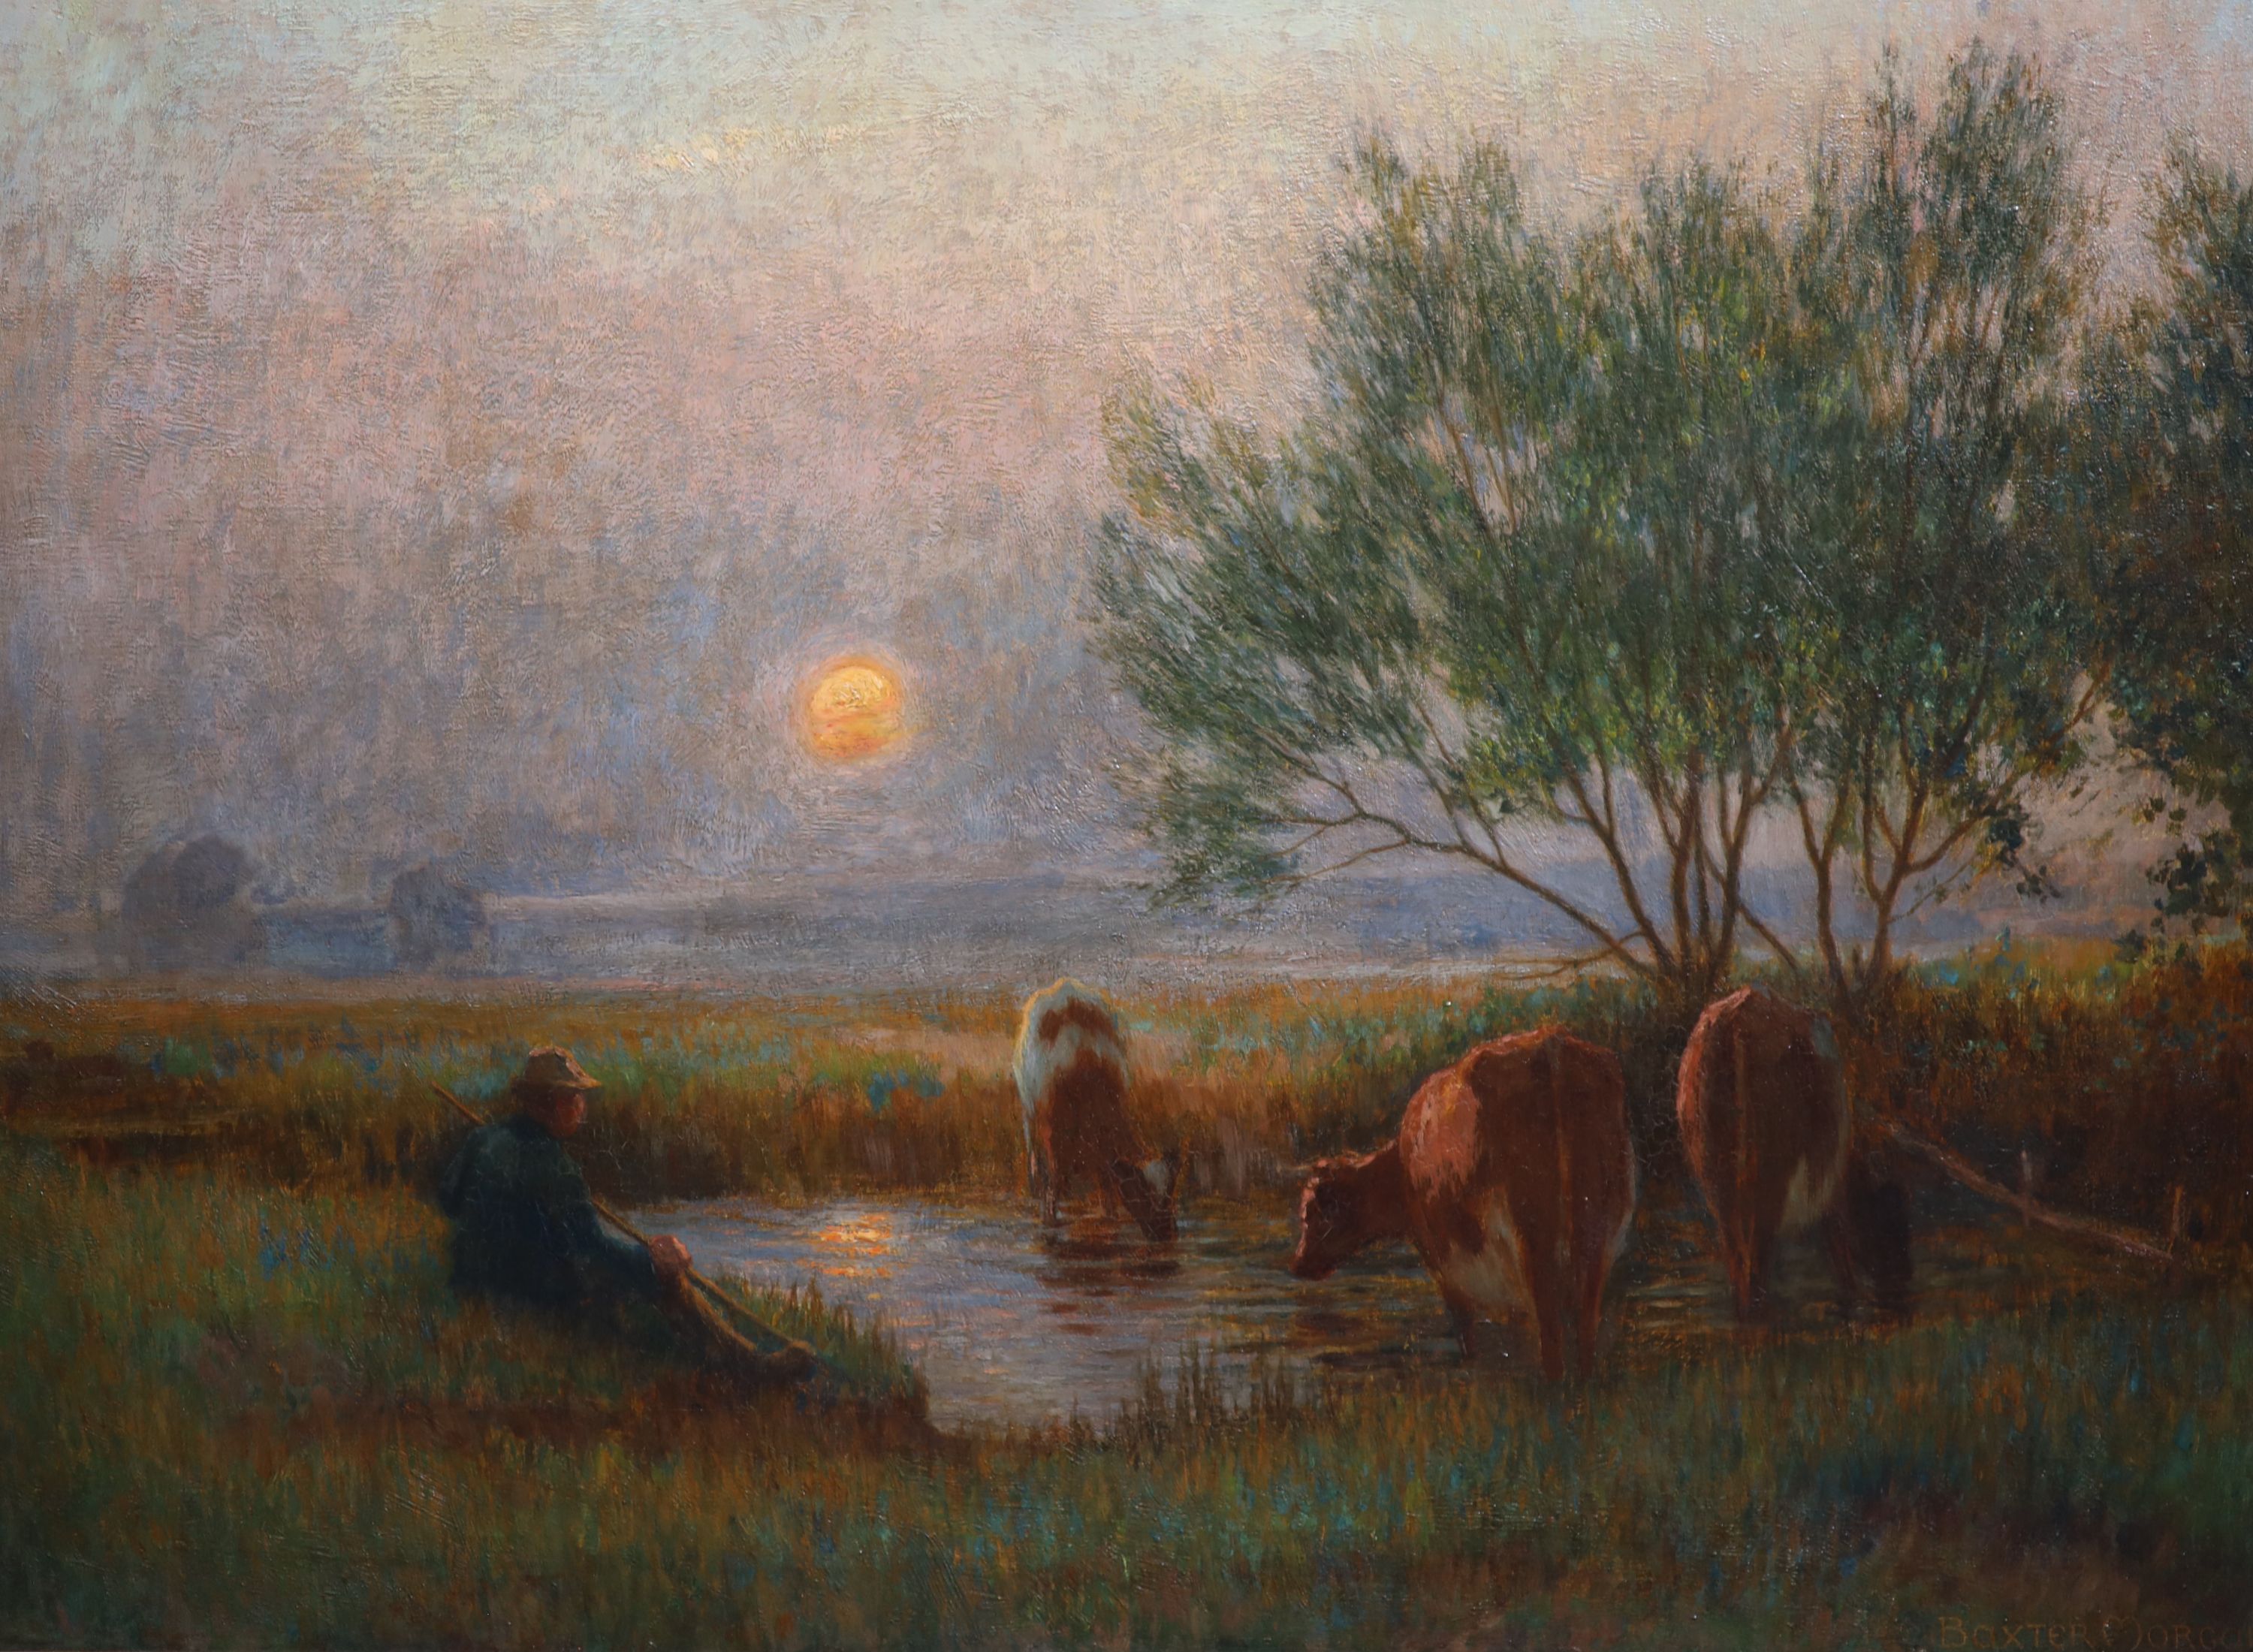 Owen Baxter Morgan (fl.1905-1932), Cattle watering at sunset, oil on canvas, 54 x 74cm